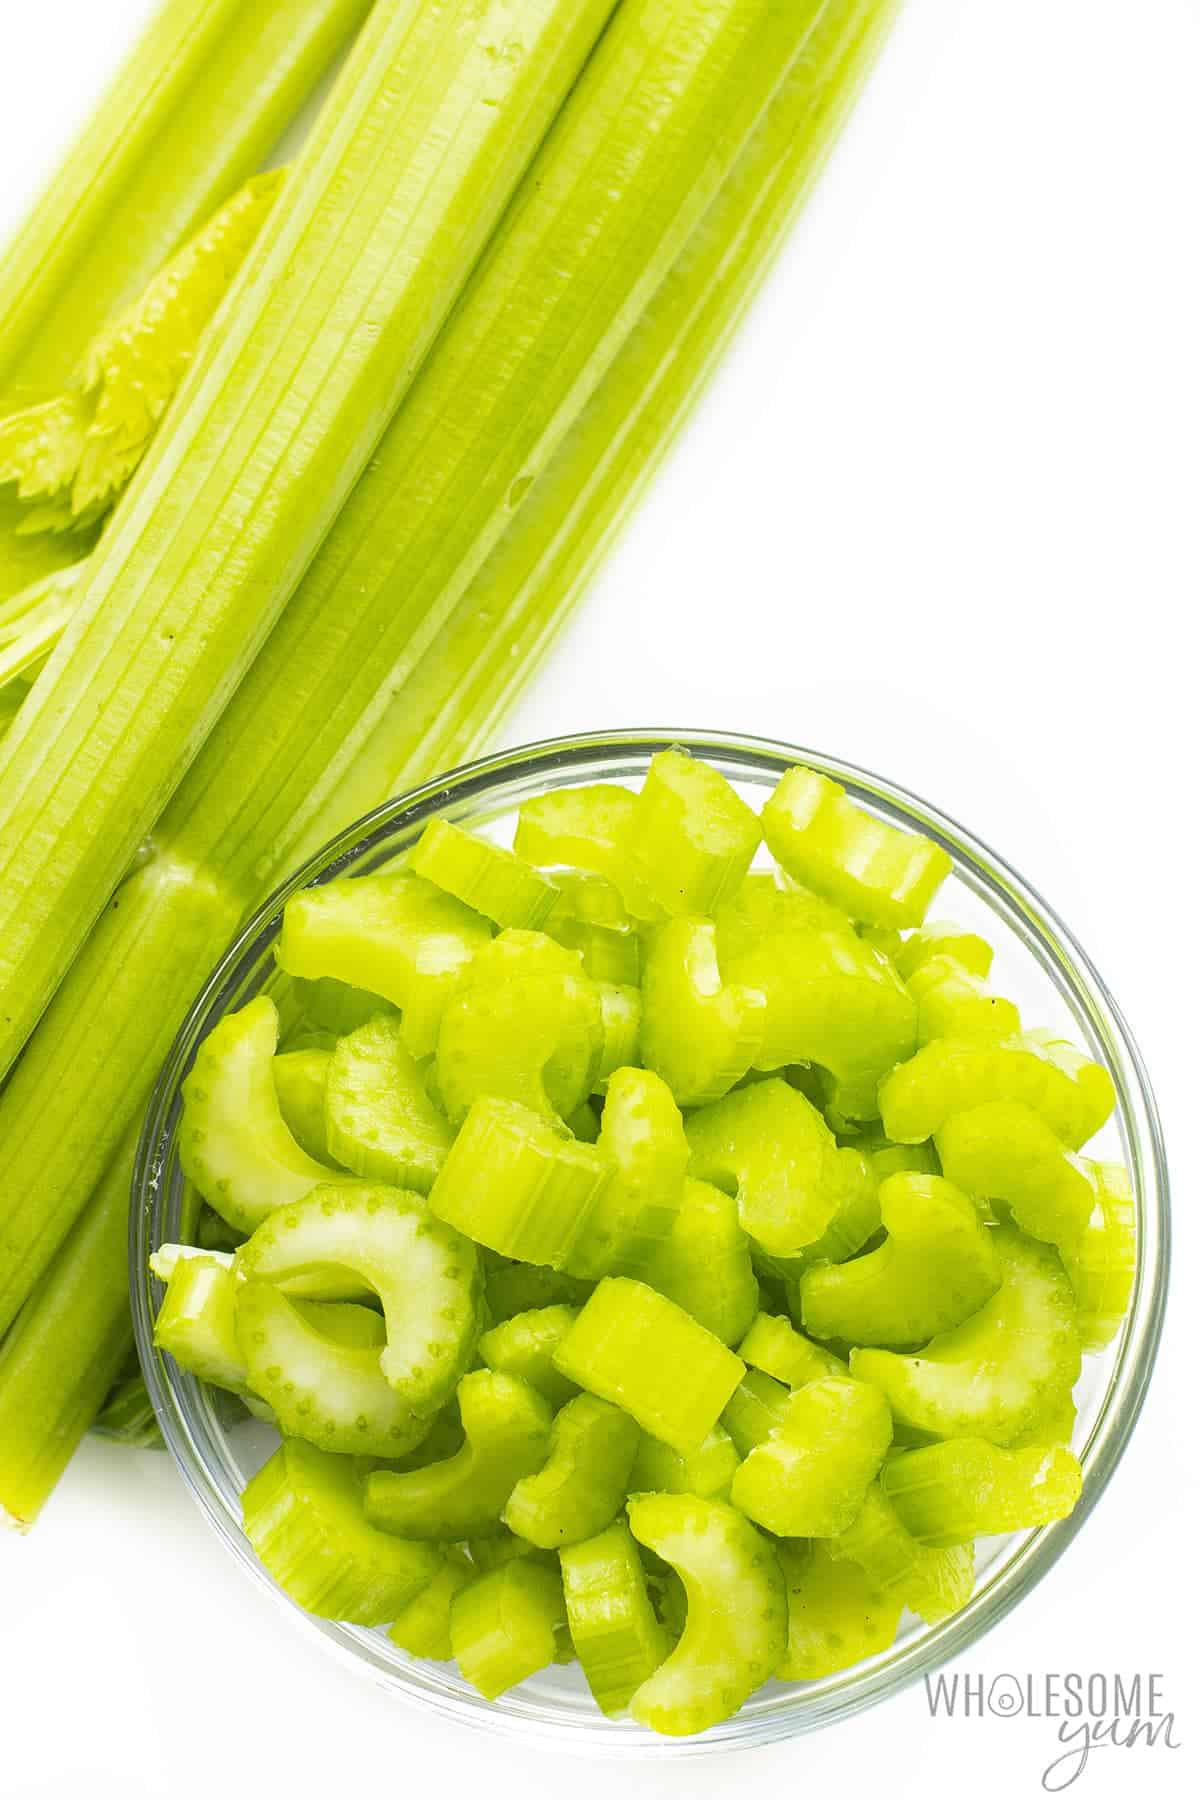 Are carbs in celery high? This raw celery is naturally low in carbs.